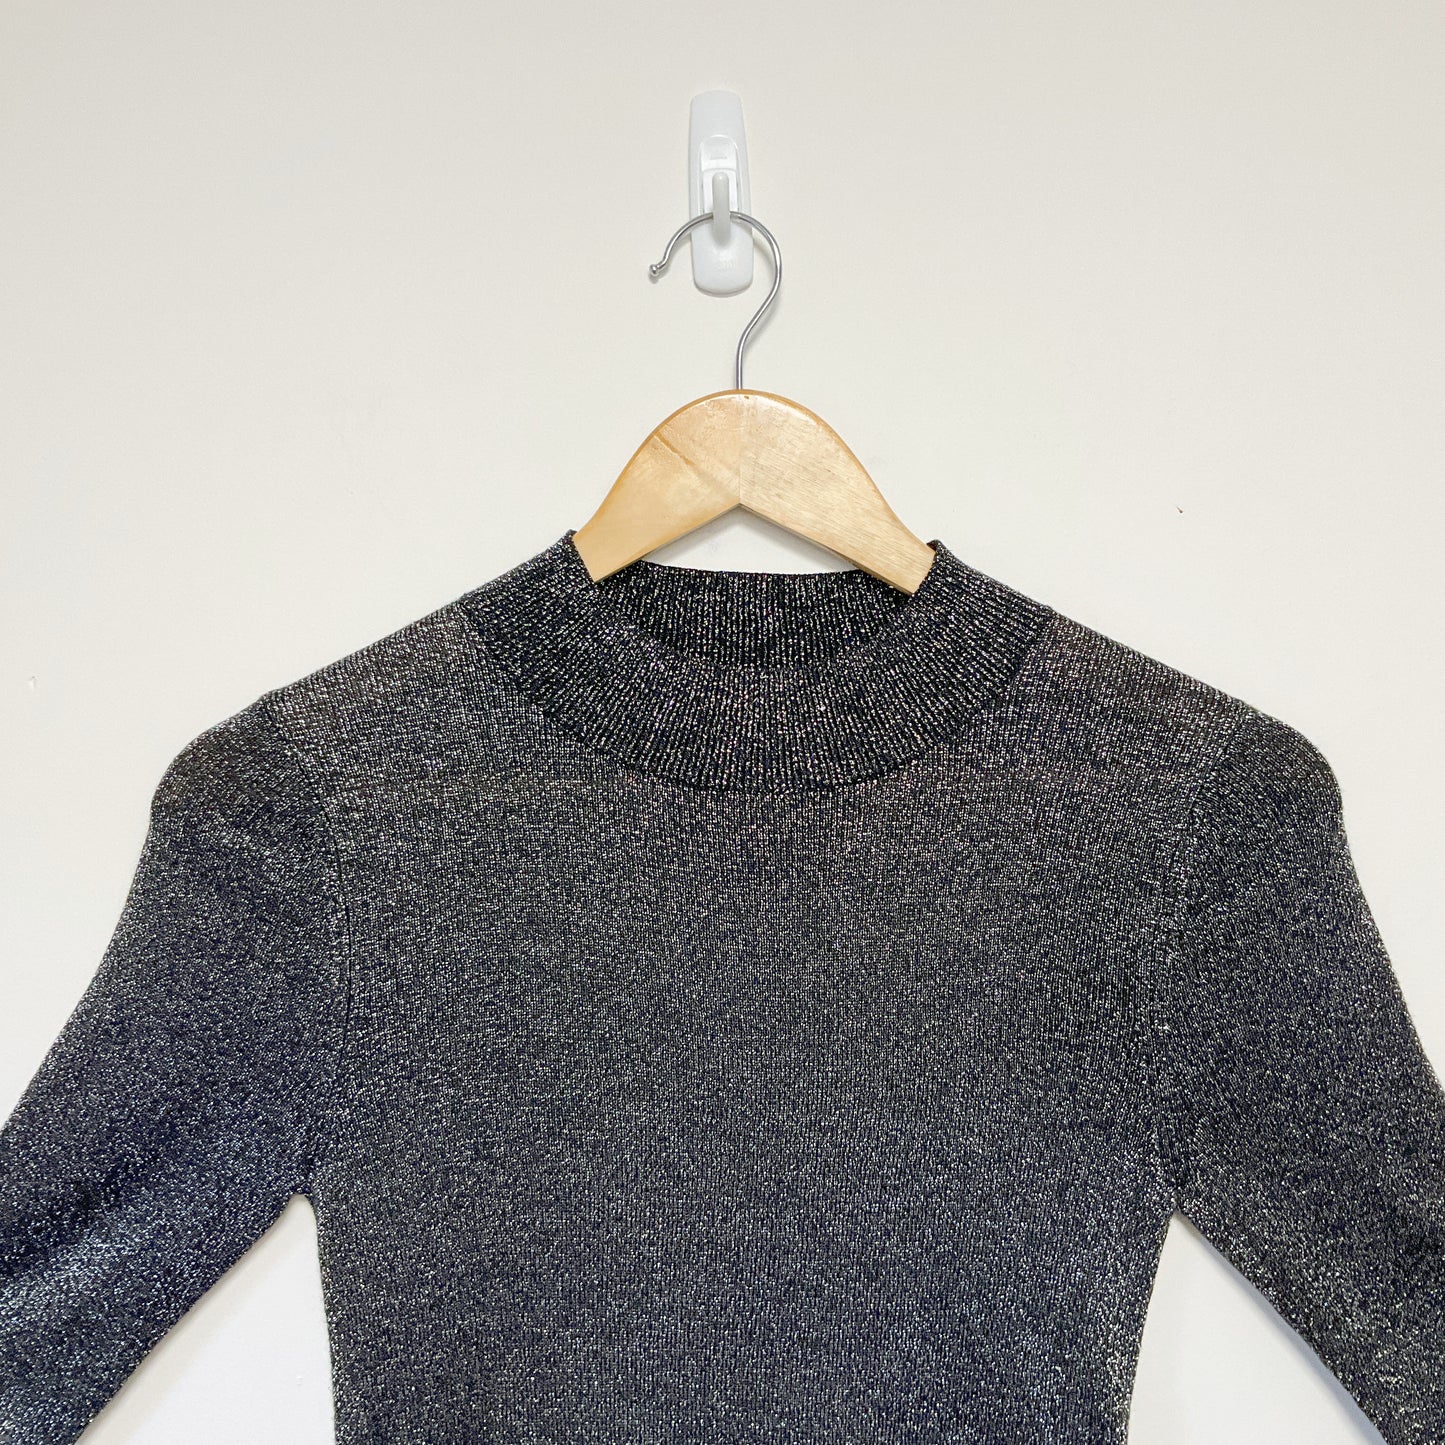 Forever New - Black Sparkly Knitted Top